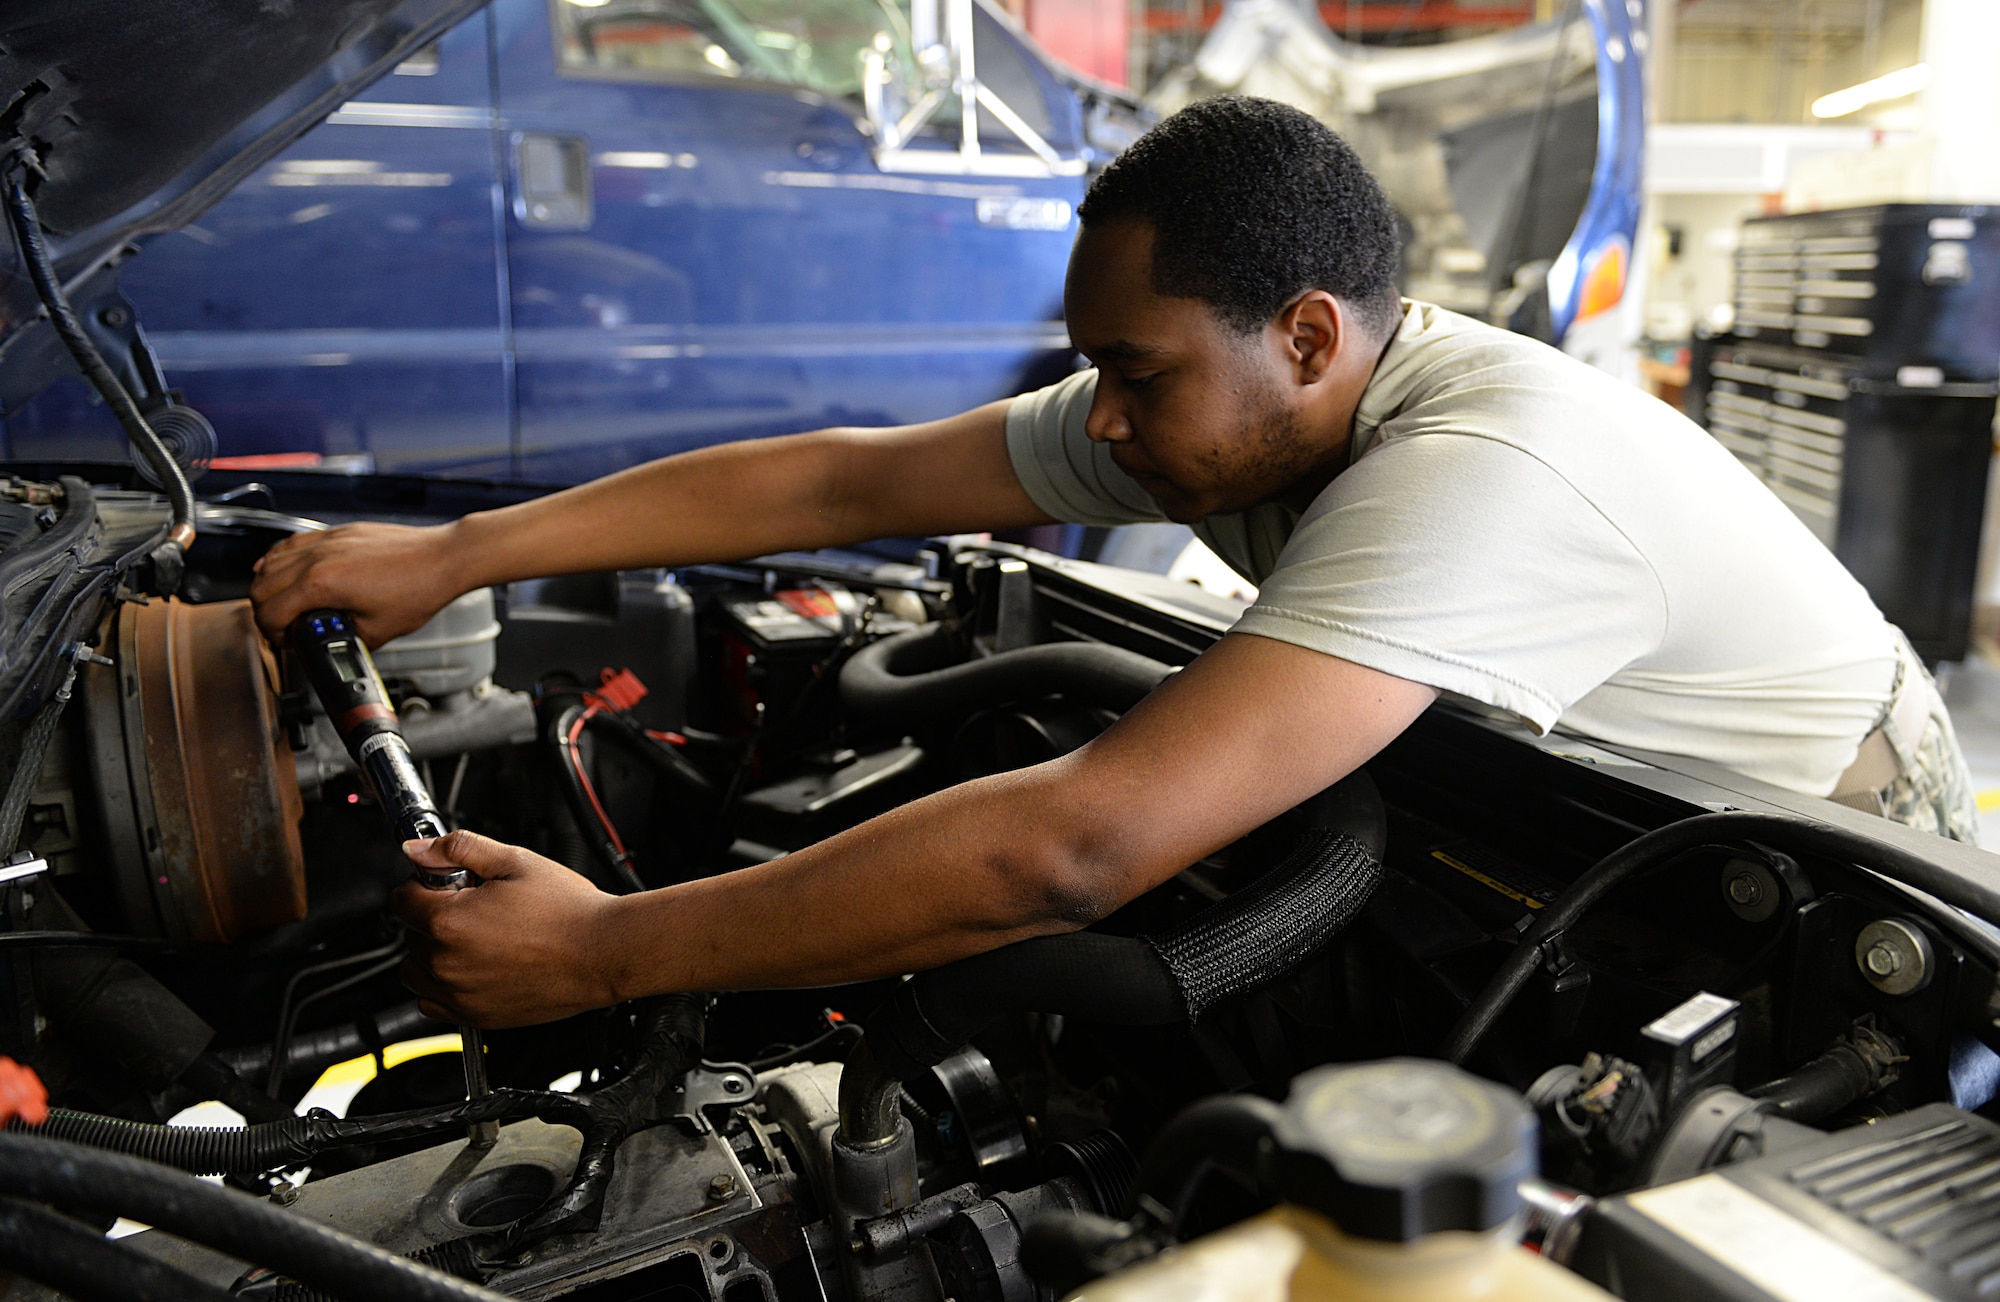 Senior Airman Kenneth Carter, 81st Logistics Readiness Squadron vehicle maintenance technician, repairs a security forces truck March 11, 2015, Keesler Air Force Base, Miss. The more than 40 member vehicle maintenance flight repair and oversee more than 420 government vehicles that belong to Keesler. (U.S. Air Force photo by Senior Airman Holly Mansfield)